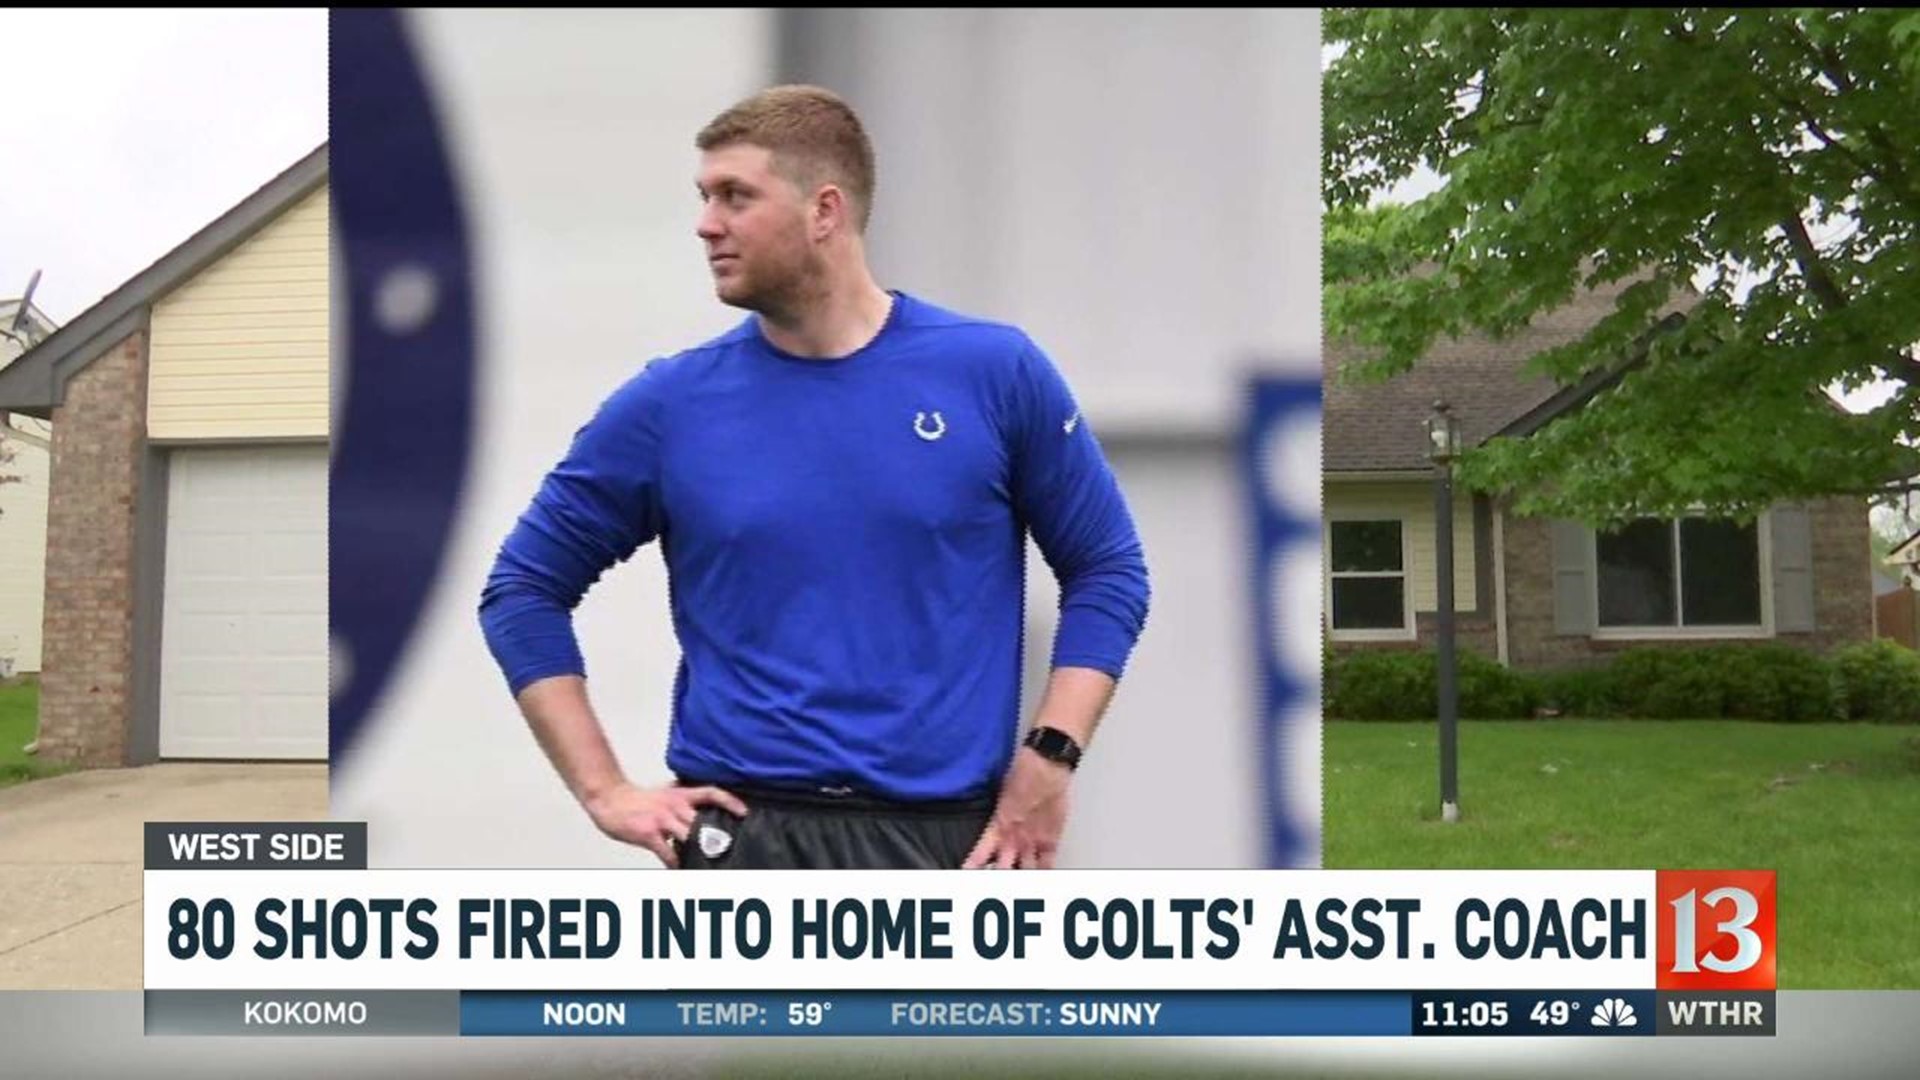 80 Shots Fired into Home of Colts' Asst. Coach